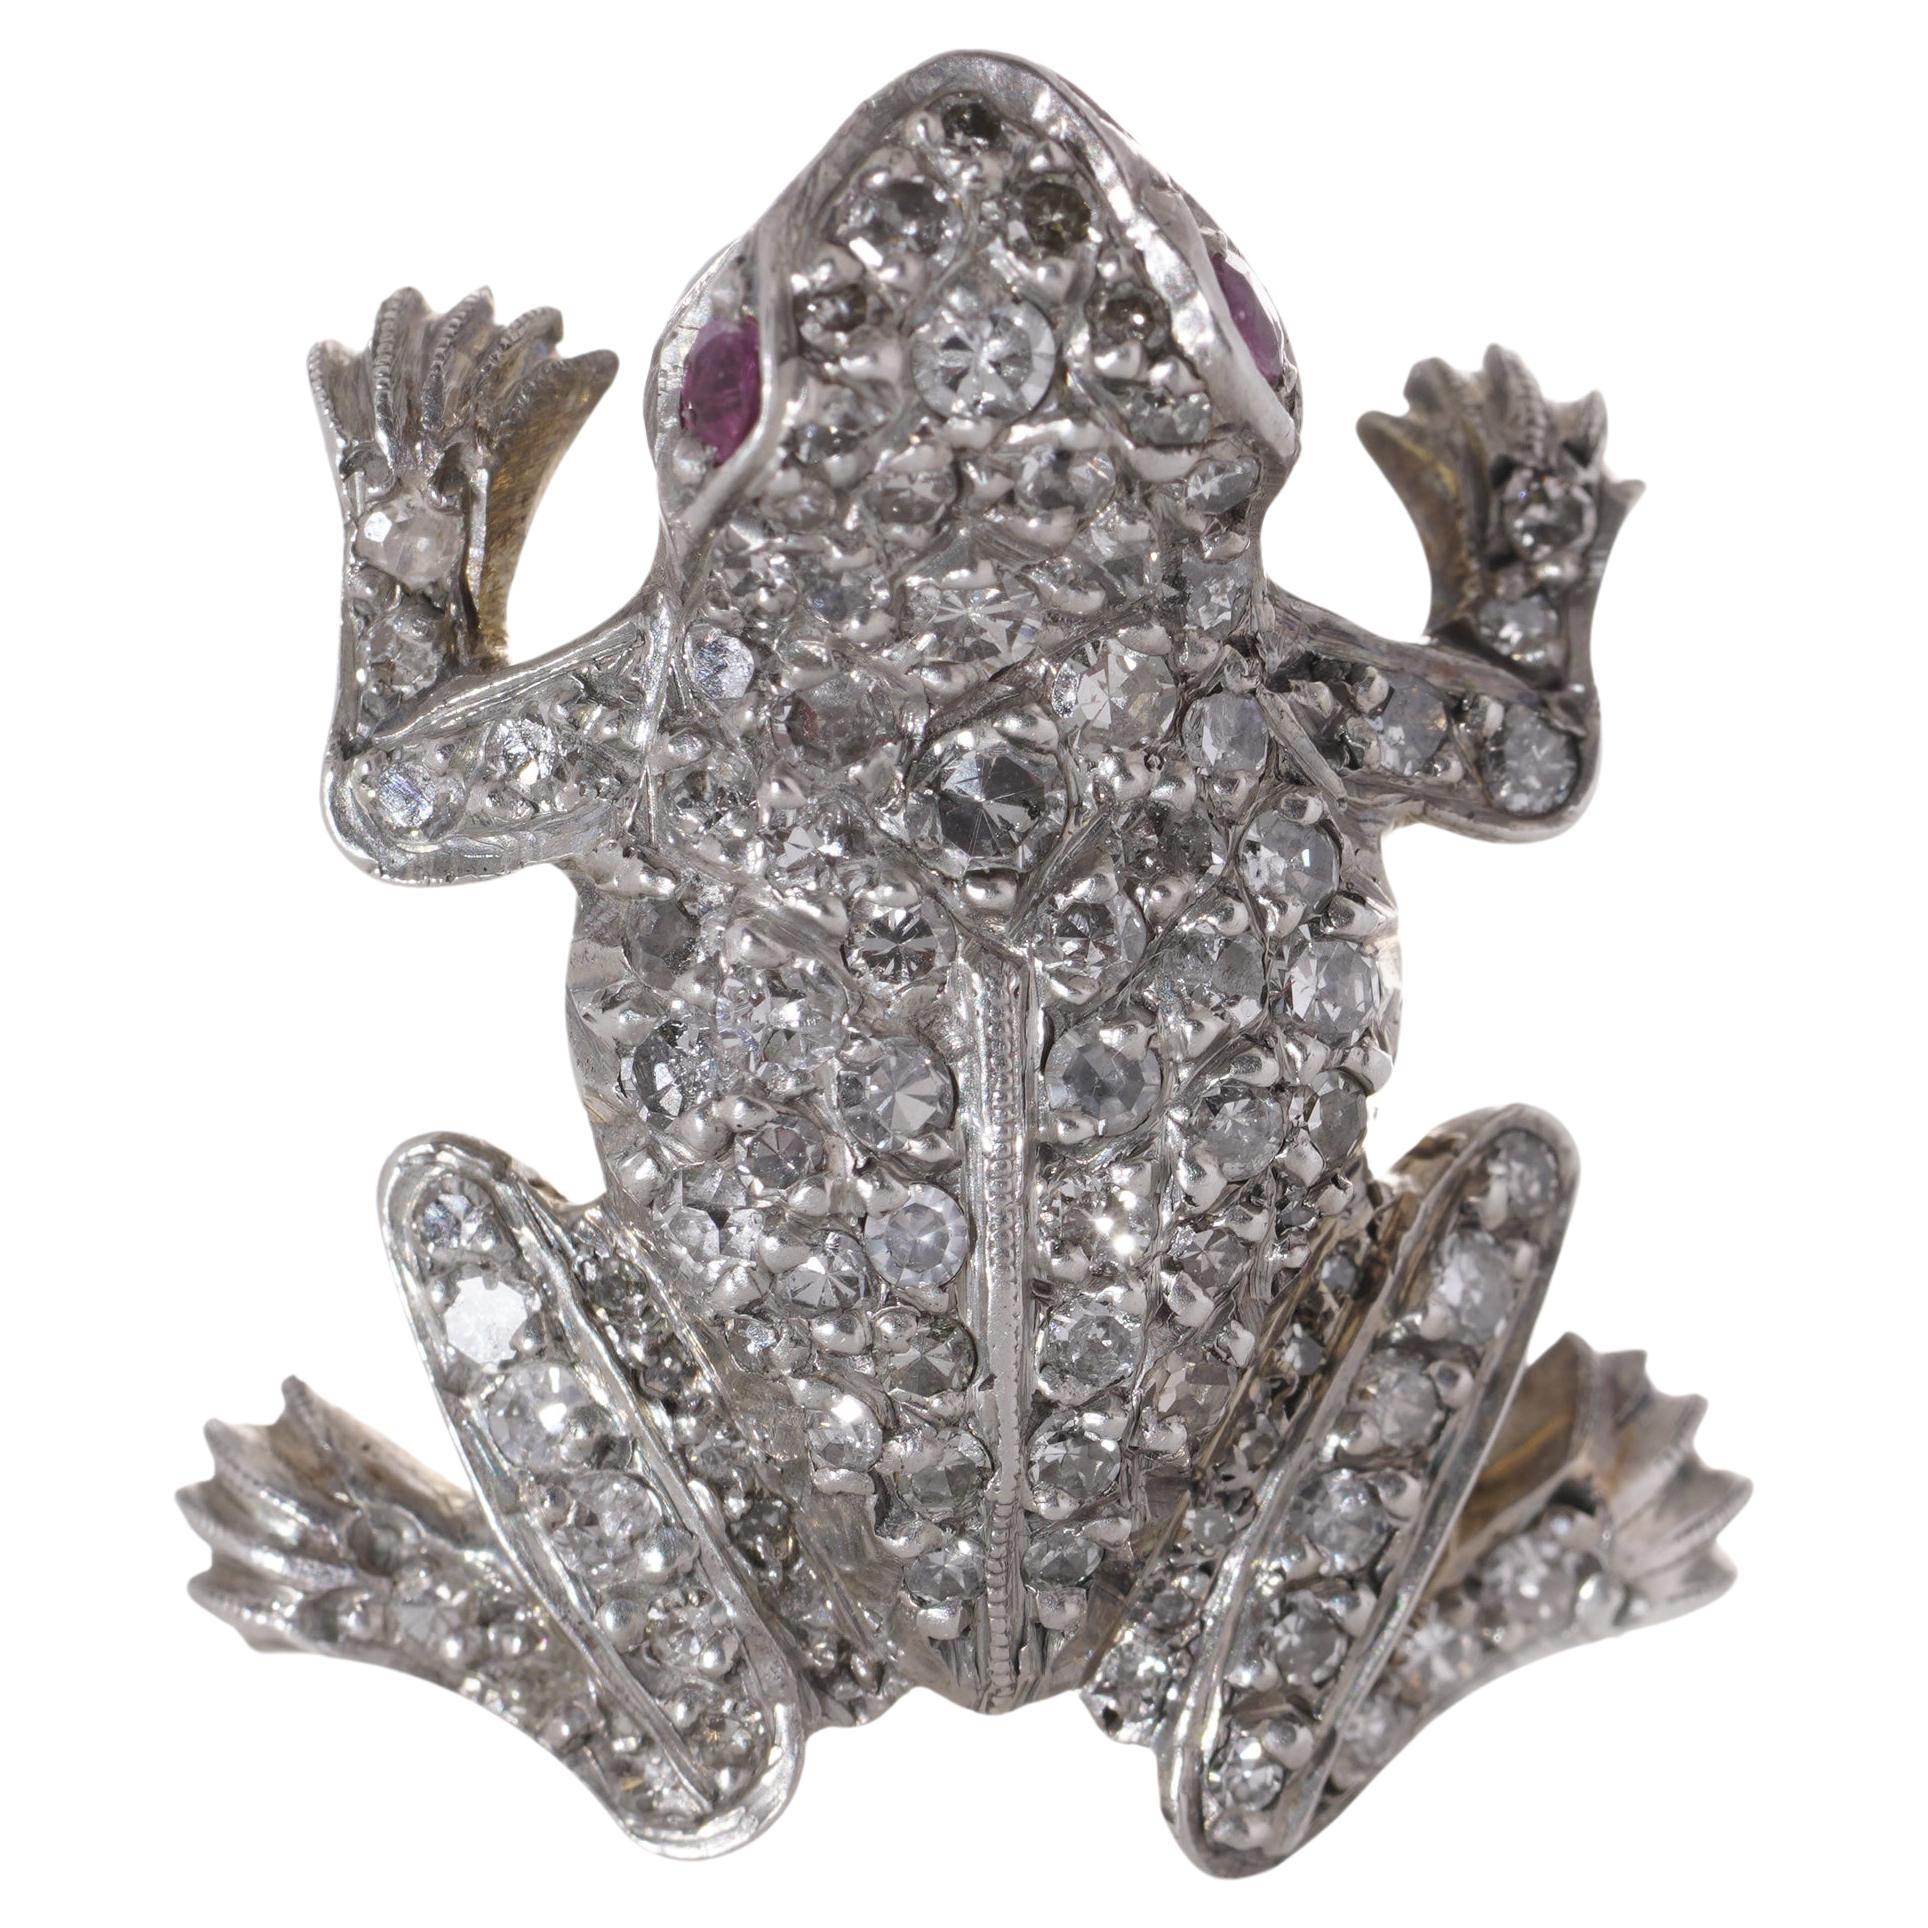 Edwardian 15kt gold and silver frog brooch with diamonds and rubies